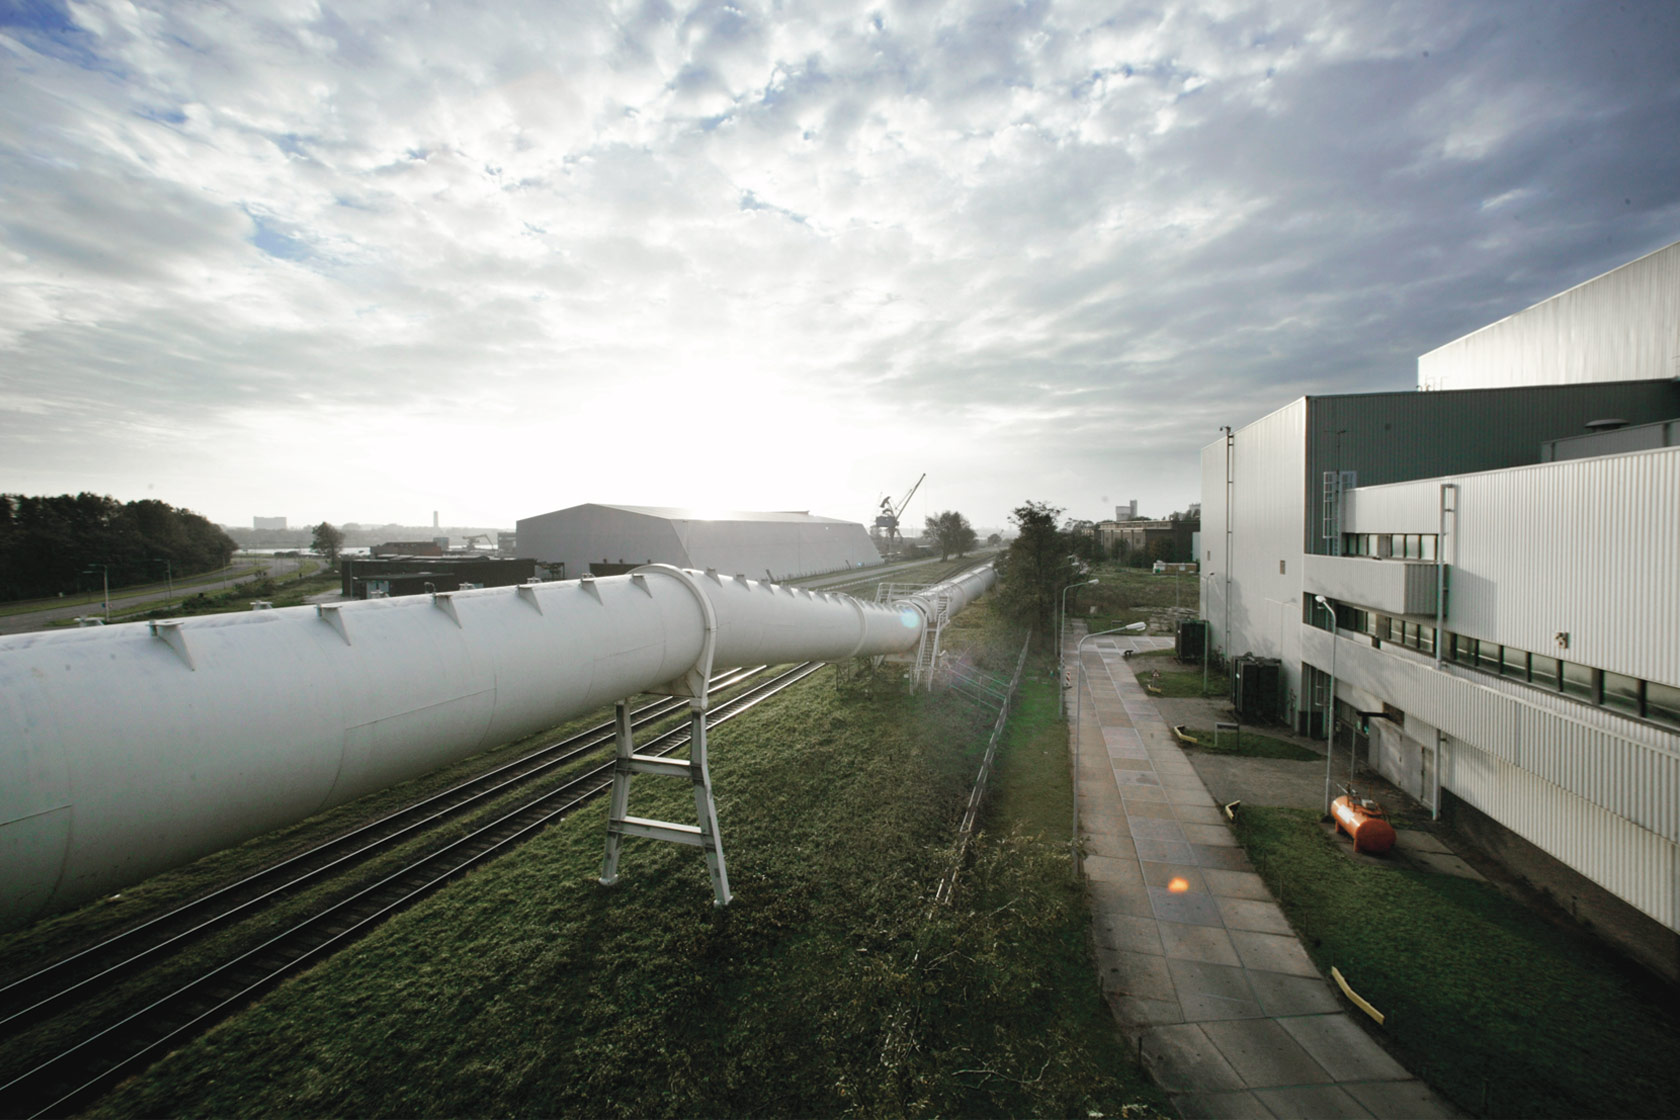 Exterior view of Velsen gas plant